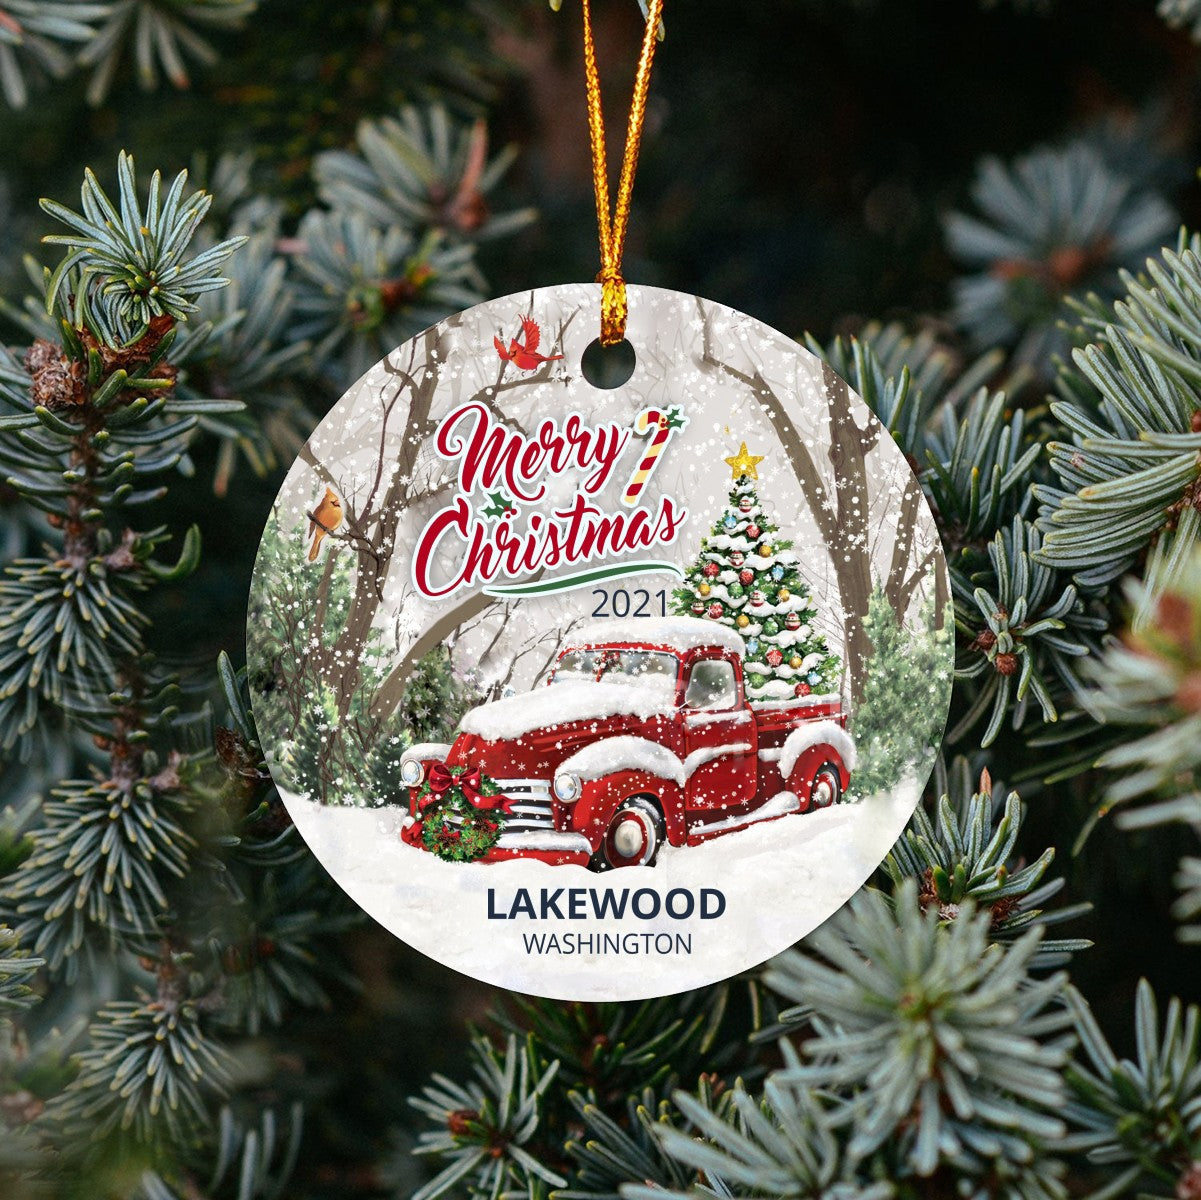 Christmas Tree Ornaments Lakewood - Ornament Customize With Name City And State Lakewood Washington WA - Red Truck Xmas Ornaments 3'' Plastic Gift For Family, Friend And Housewarming